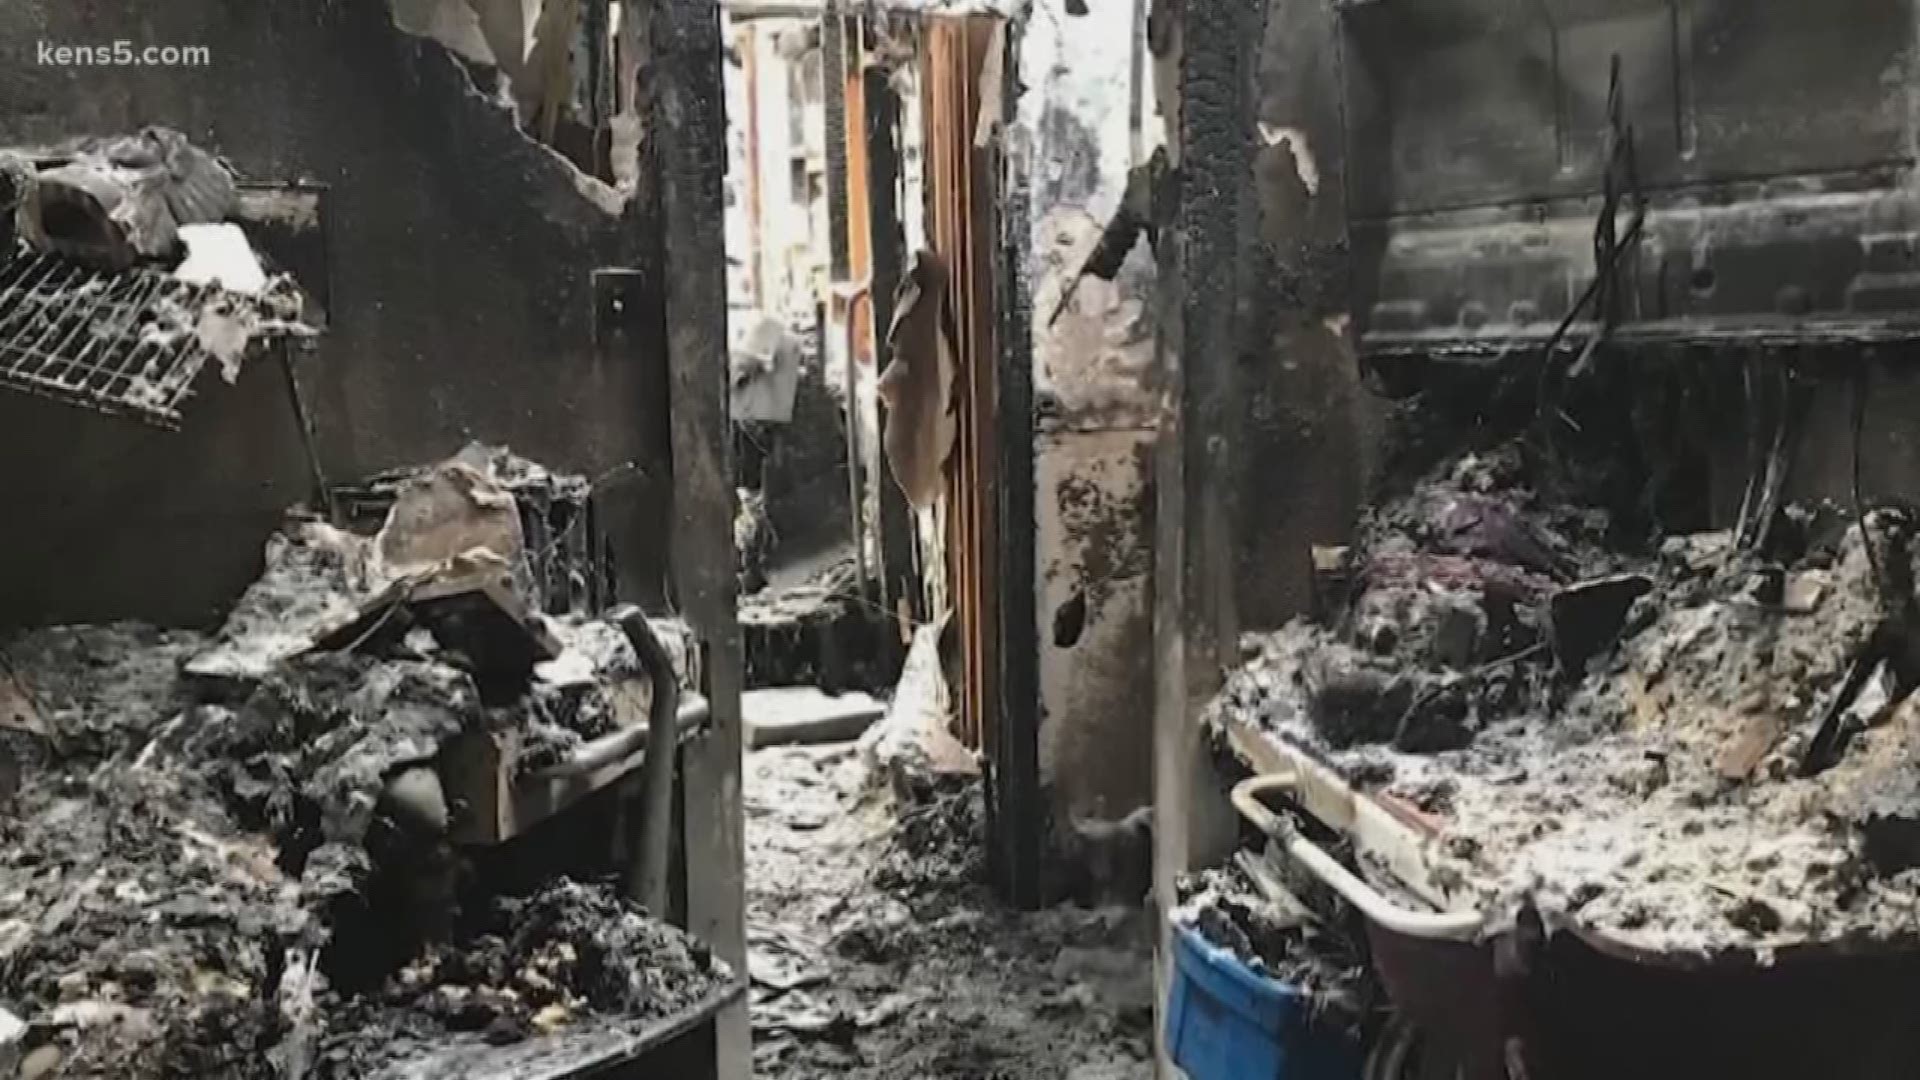 Everything the 88-year-old woman owns was destroyed when a fire devoured her home of 60 years.